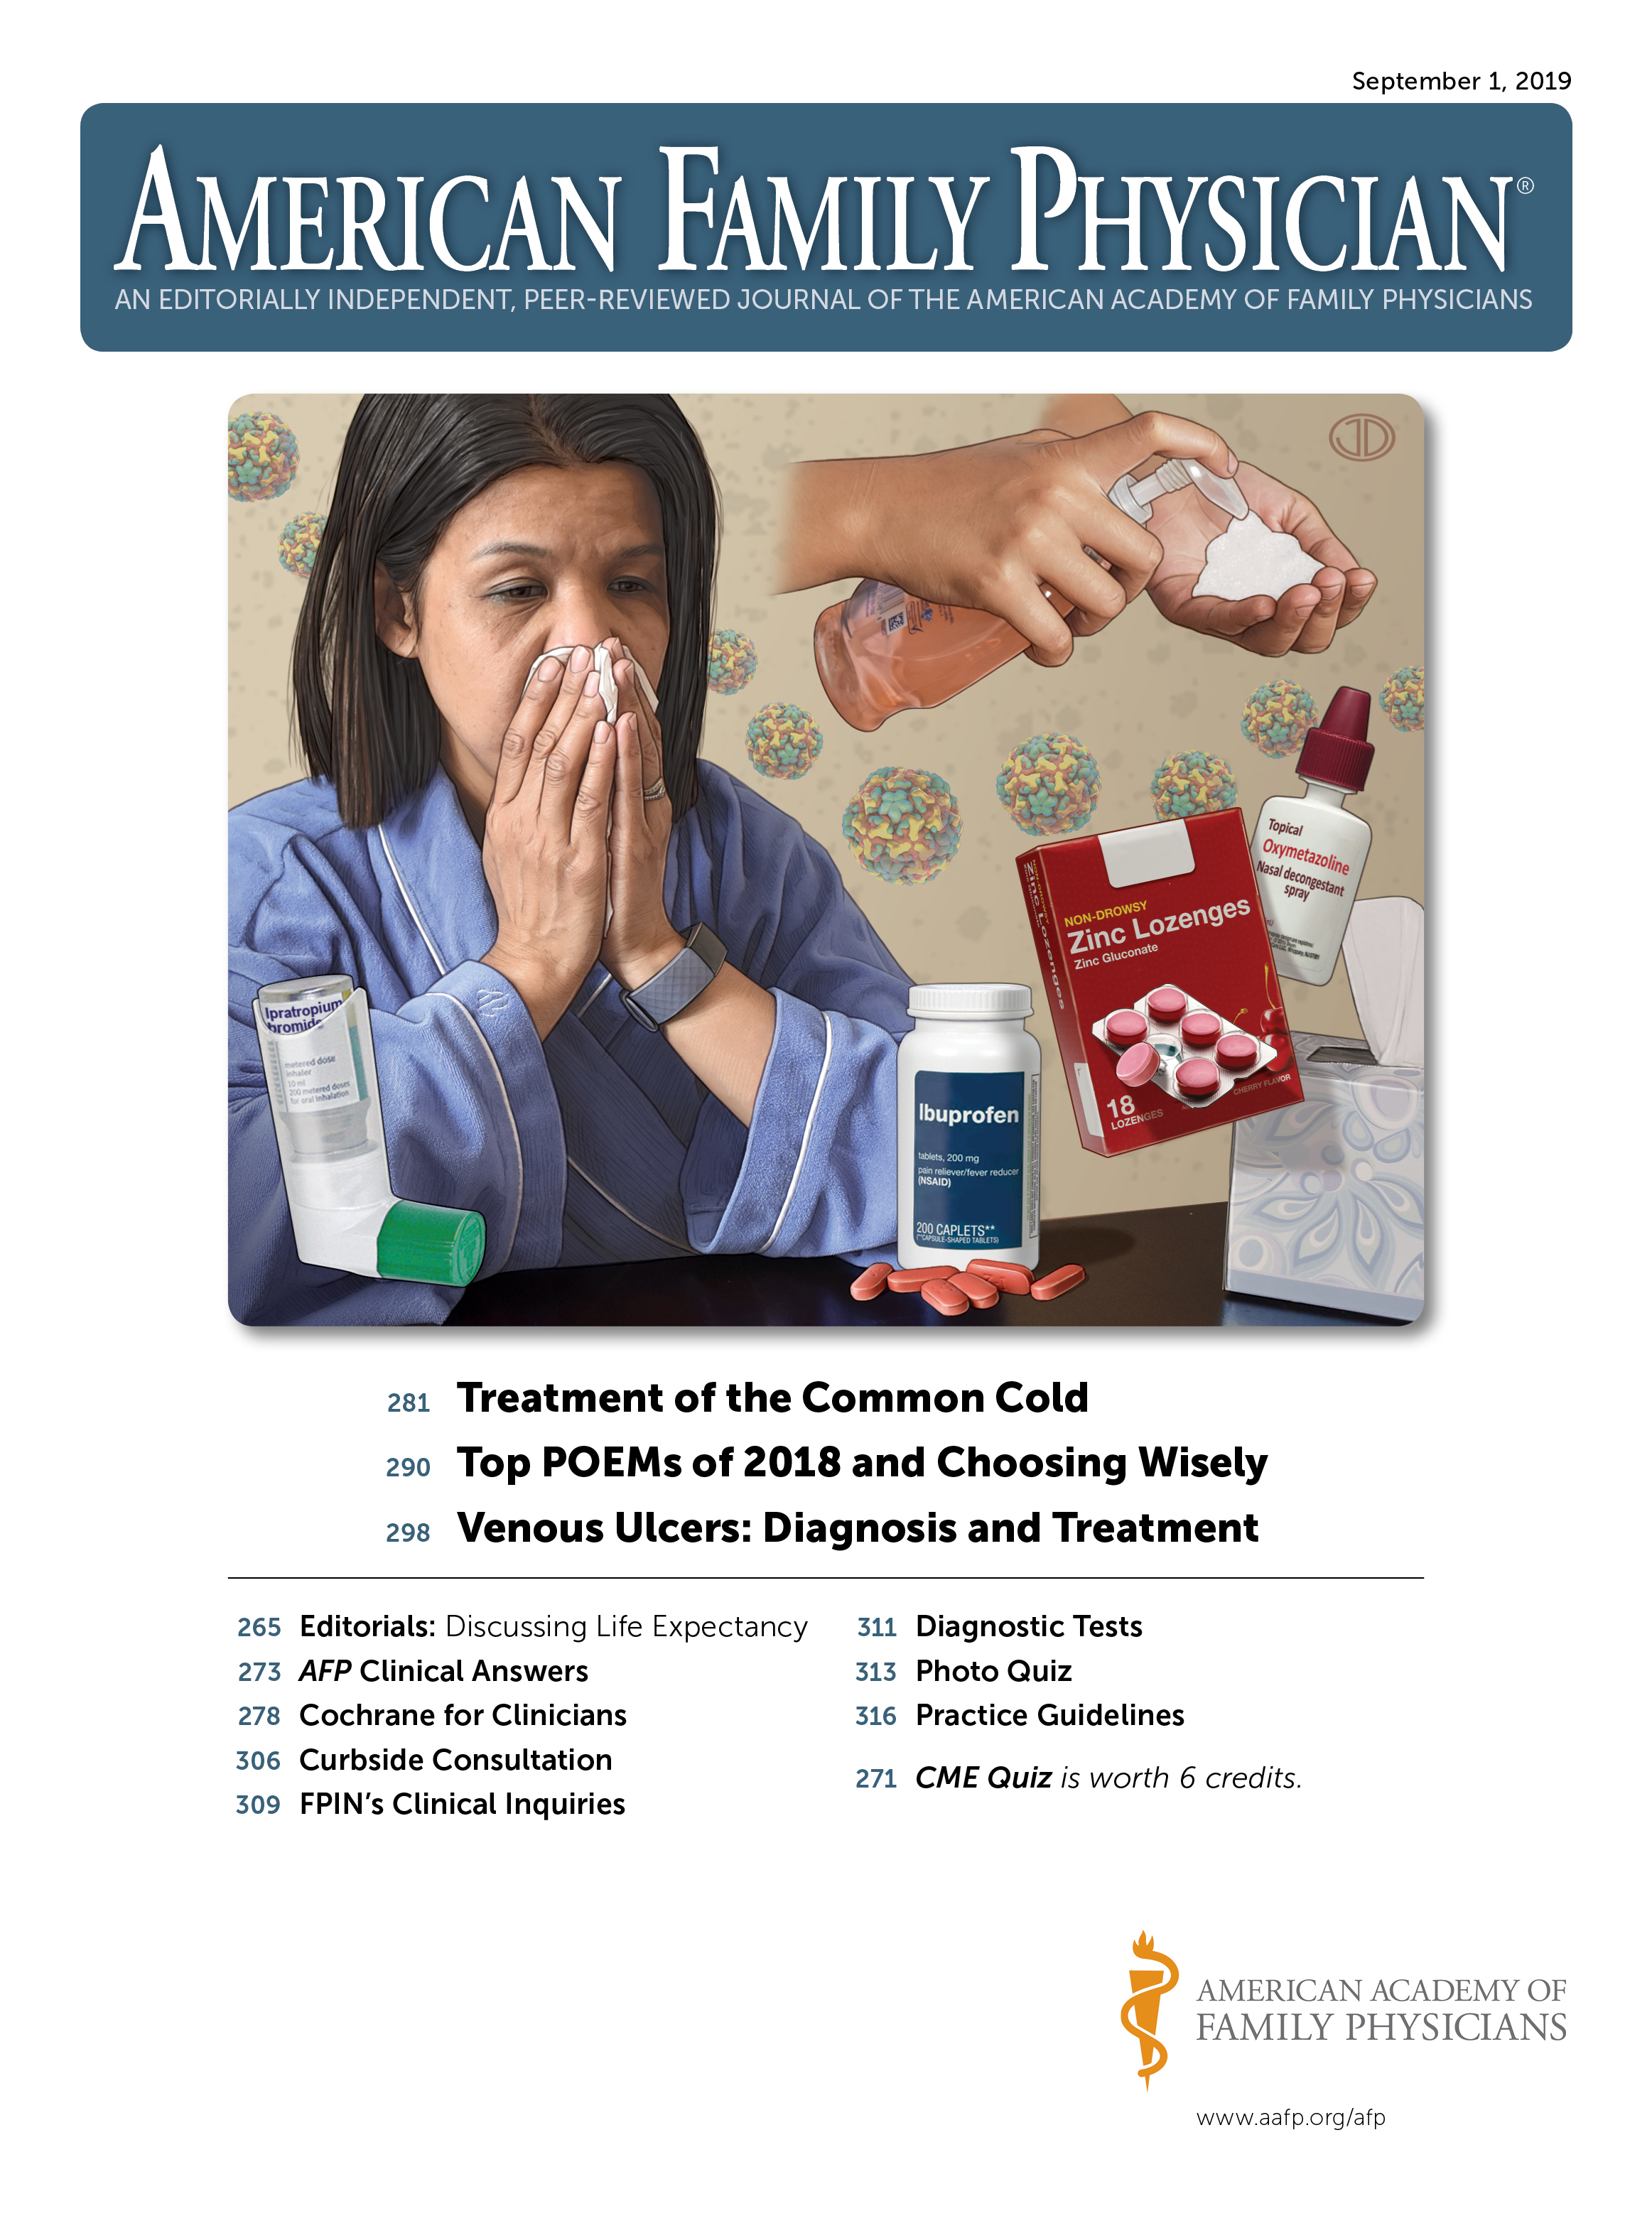 Treating the Common Cold in Children | AAFP